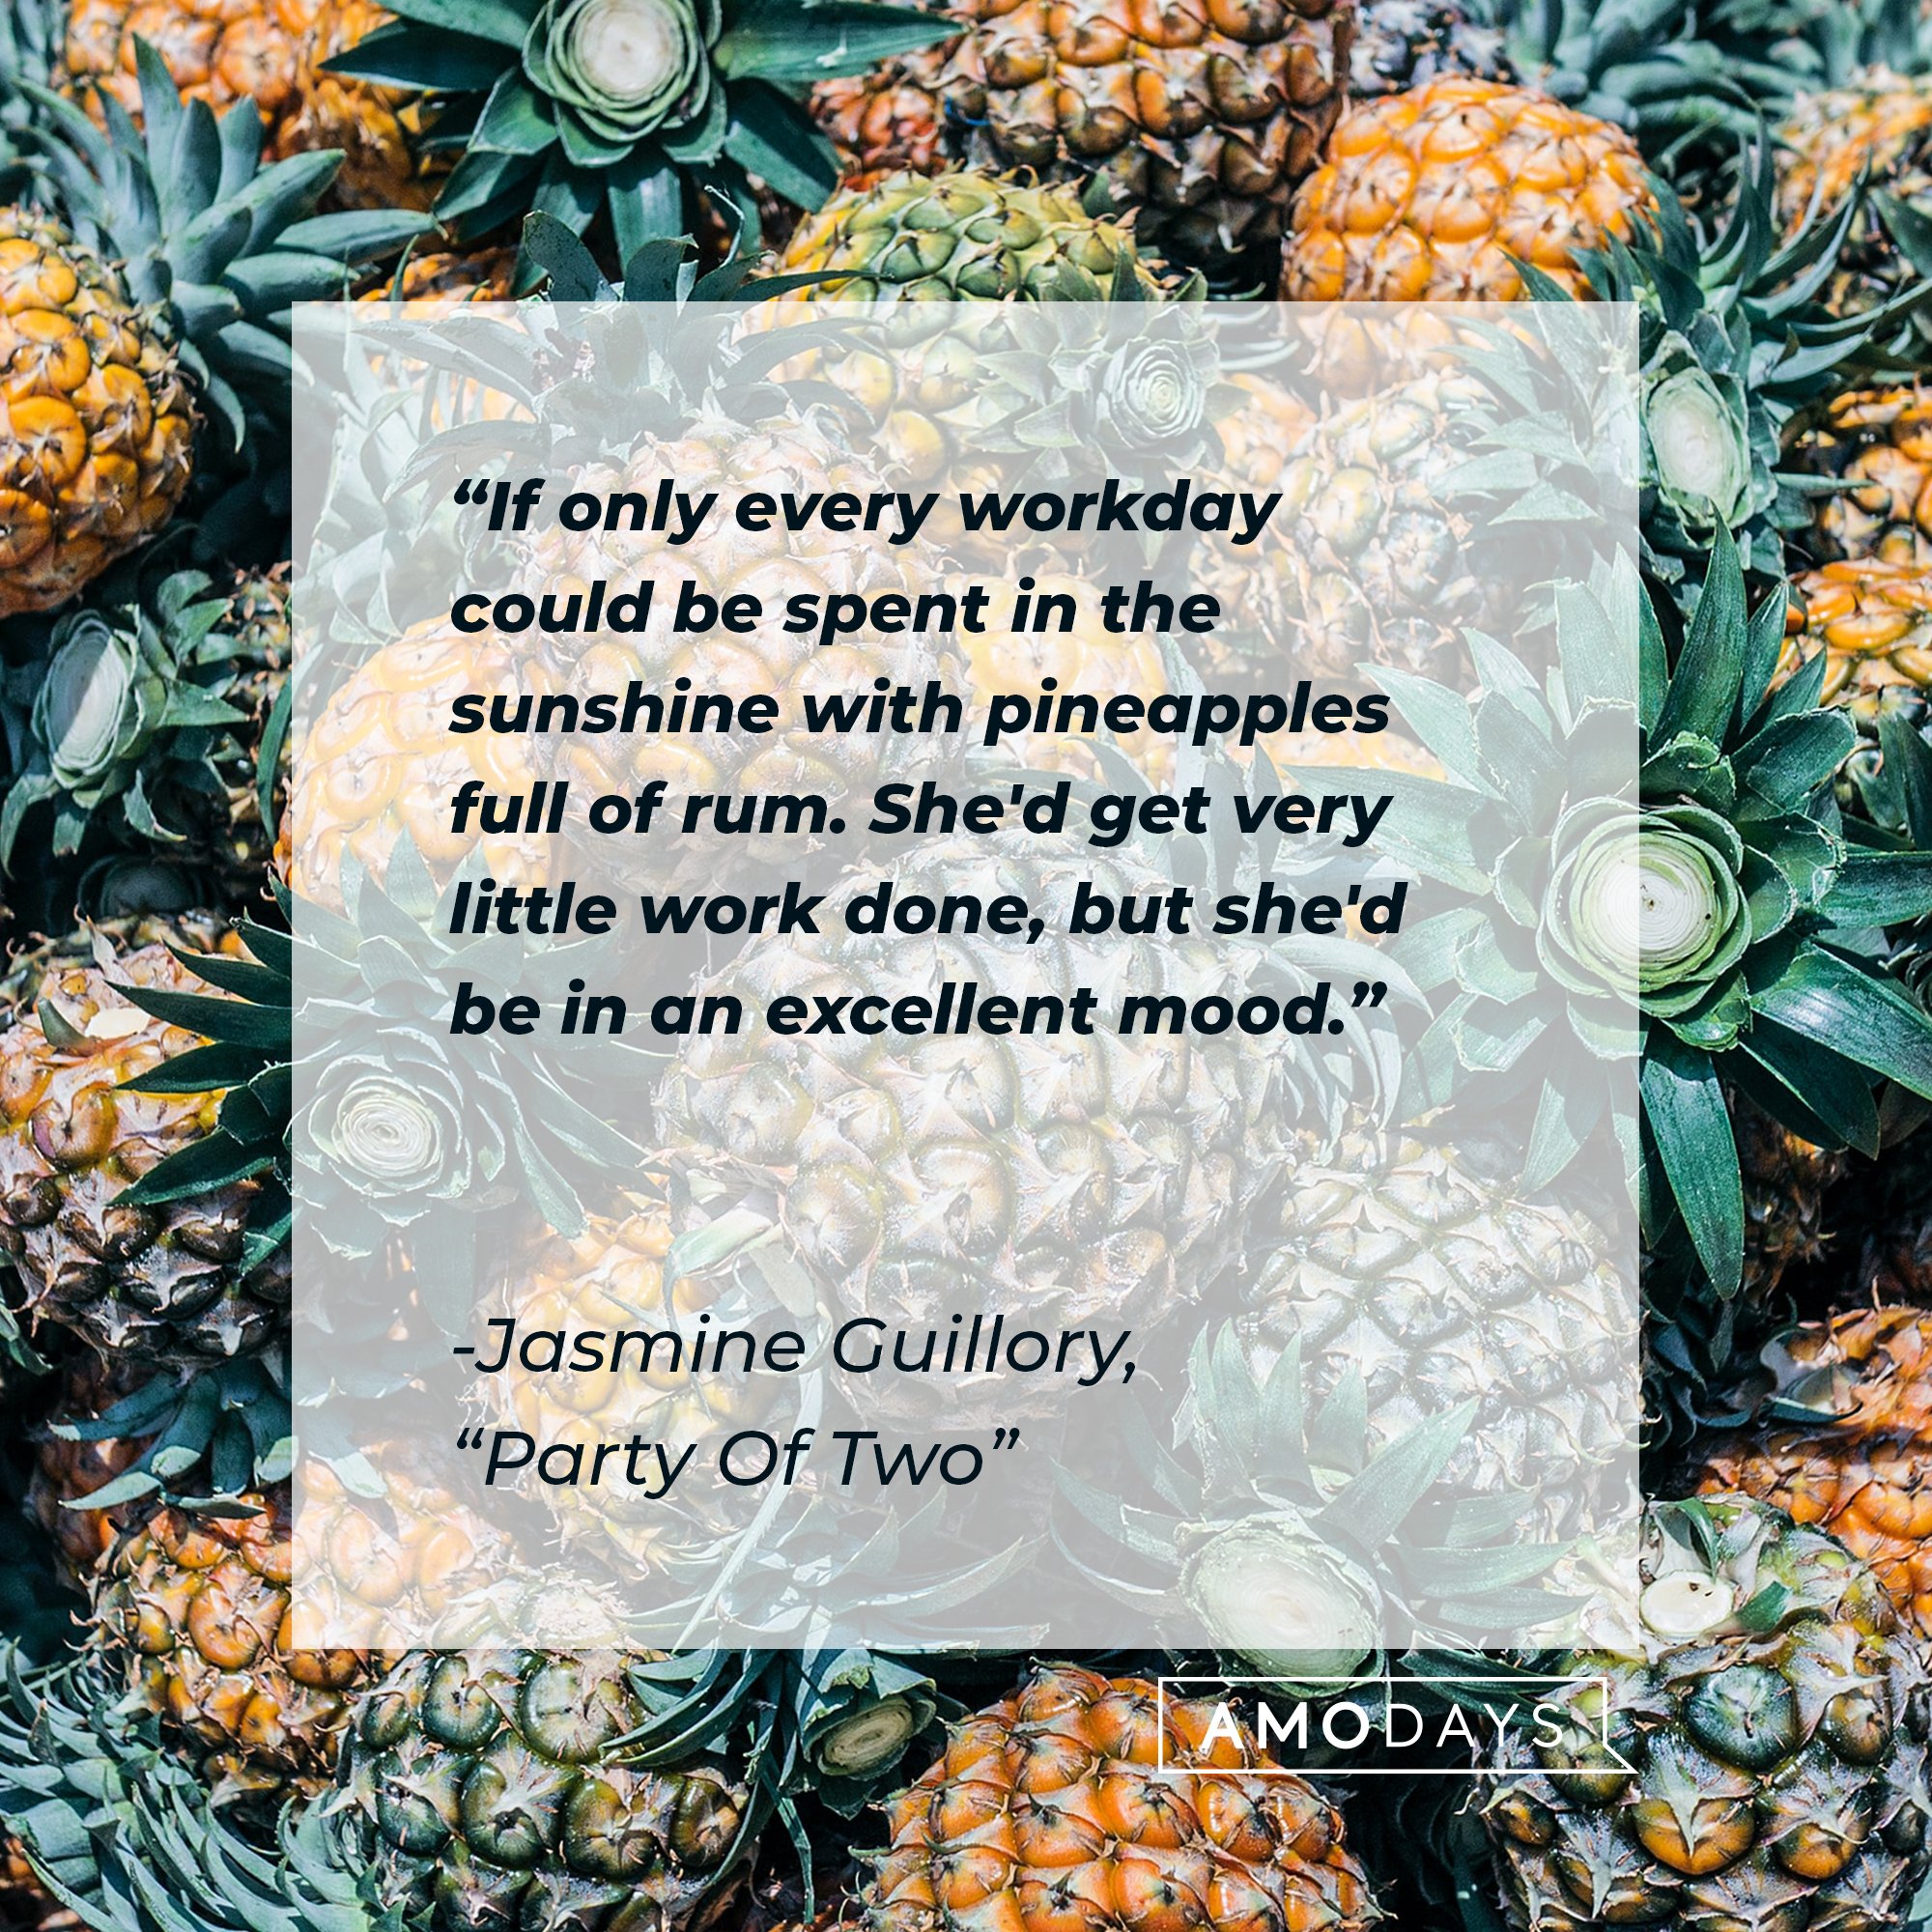 Jasmine Guillory's "Party Of Two" quote:  "If only every workday could be spent in the sunshine with pineapples full of rum. She'd get very little work done, but she'd be in an excellent mood." | Image: AmoDays